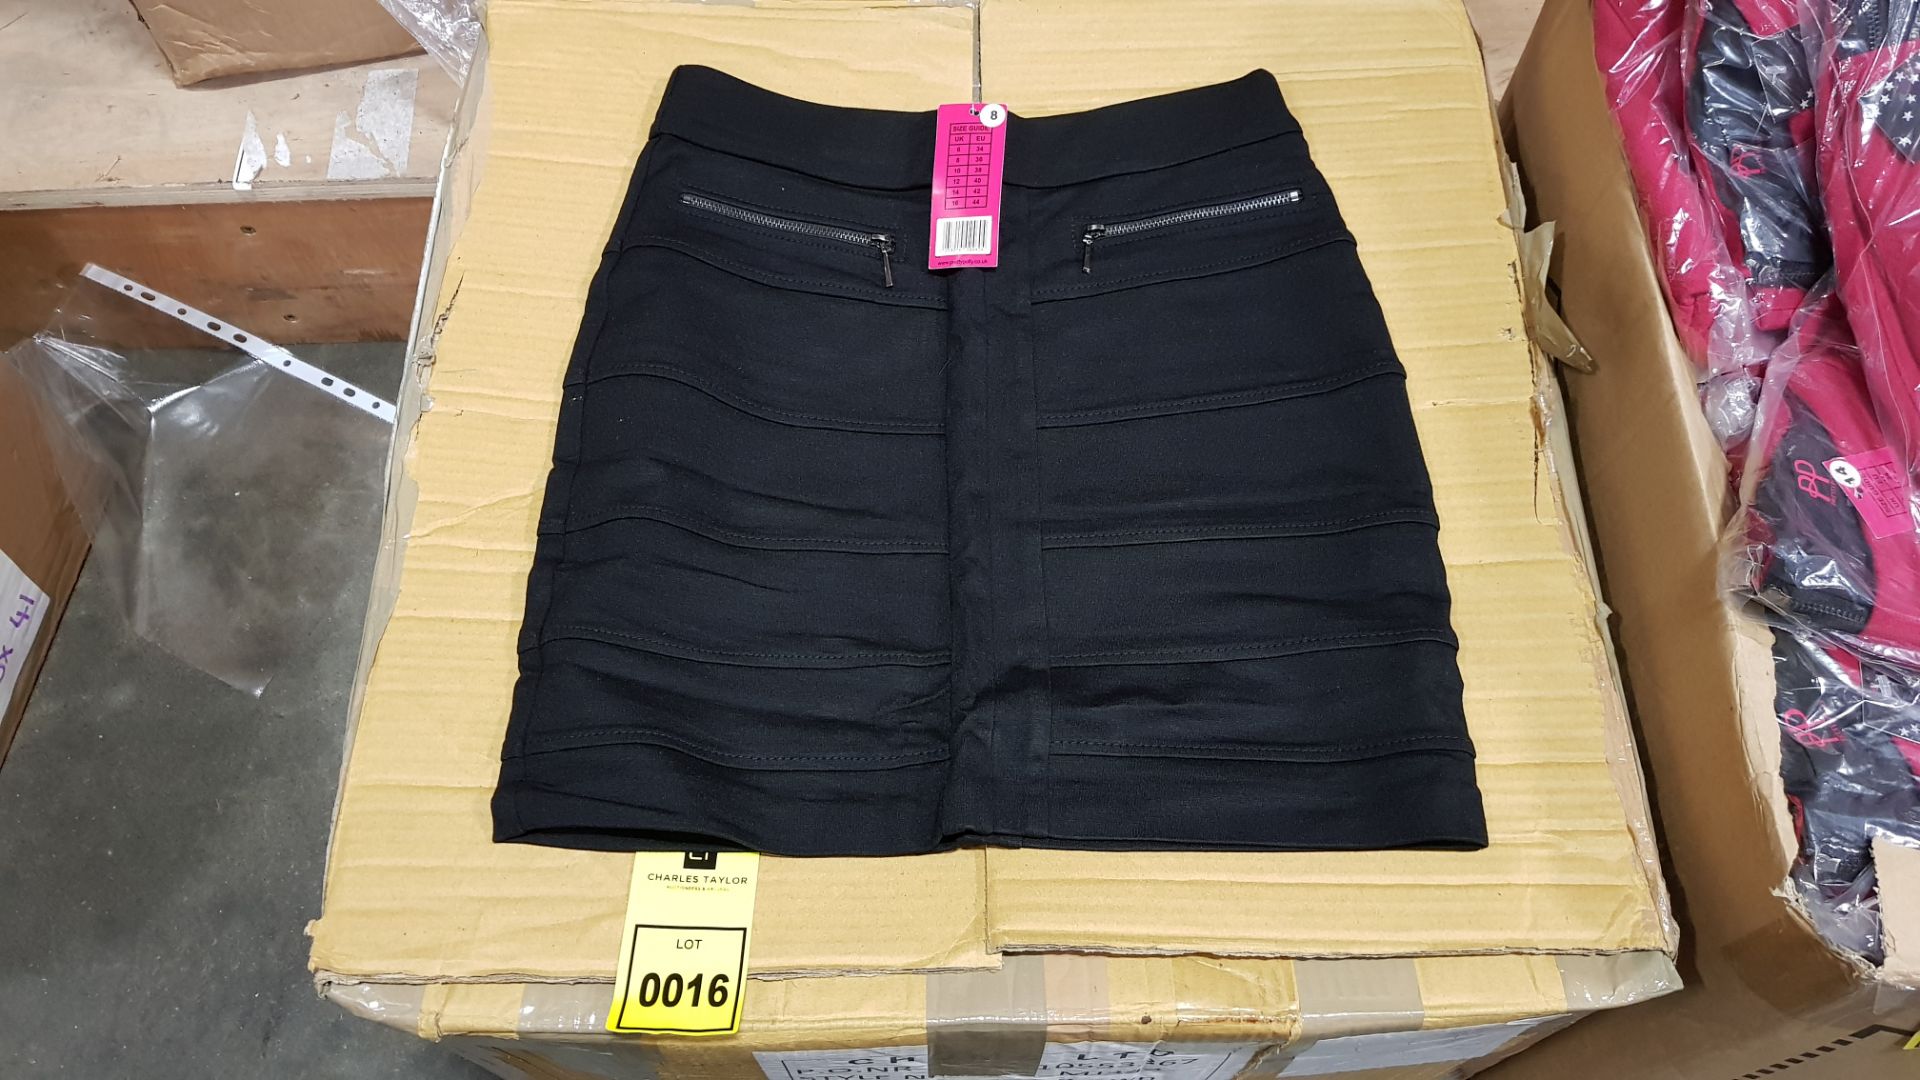 50 X BRAND NEW PRETTY POLLY BLACK BODYCON SKIRTS IN VARIOUS STYLES AND SIZES IE UK SIZE 8 AND 14